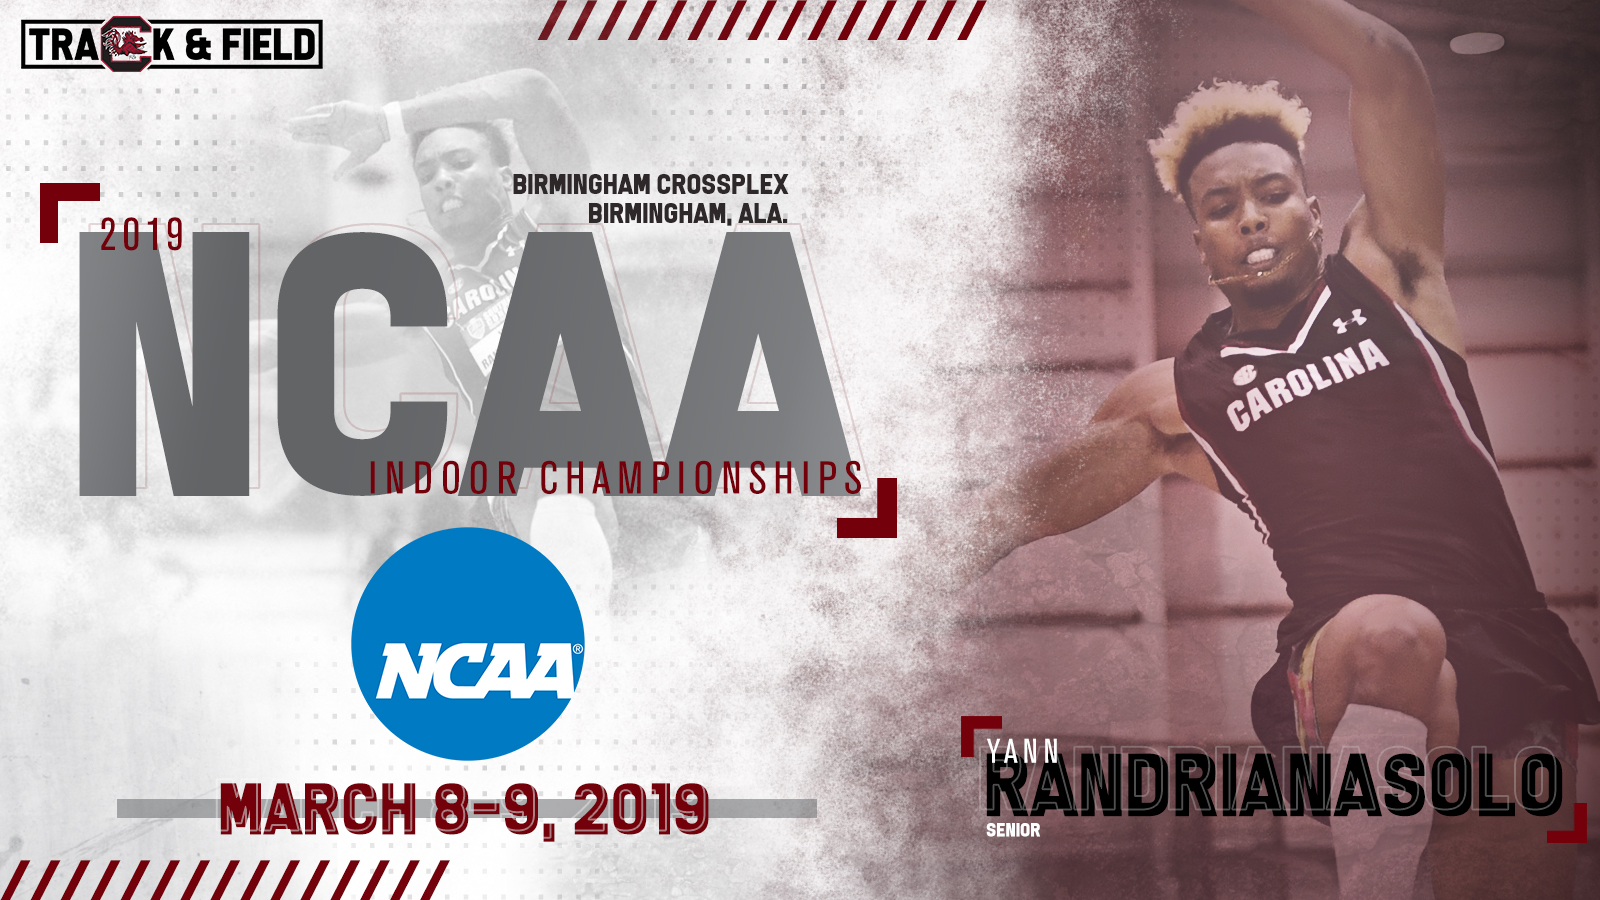 Gamecocks Send Six Entries to NCAA Indoor Championships